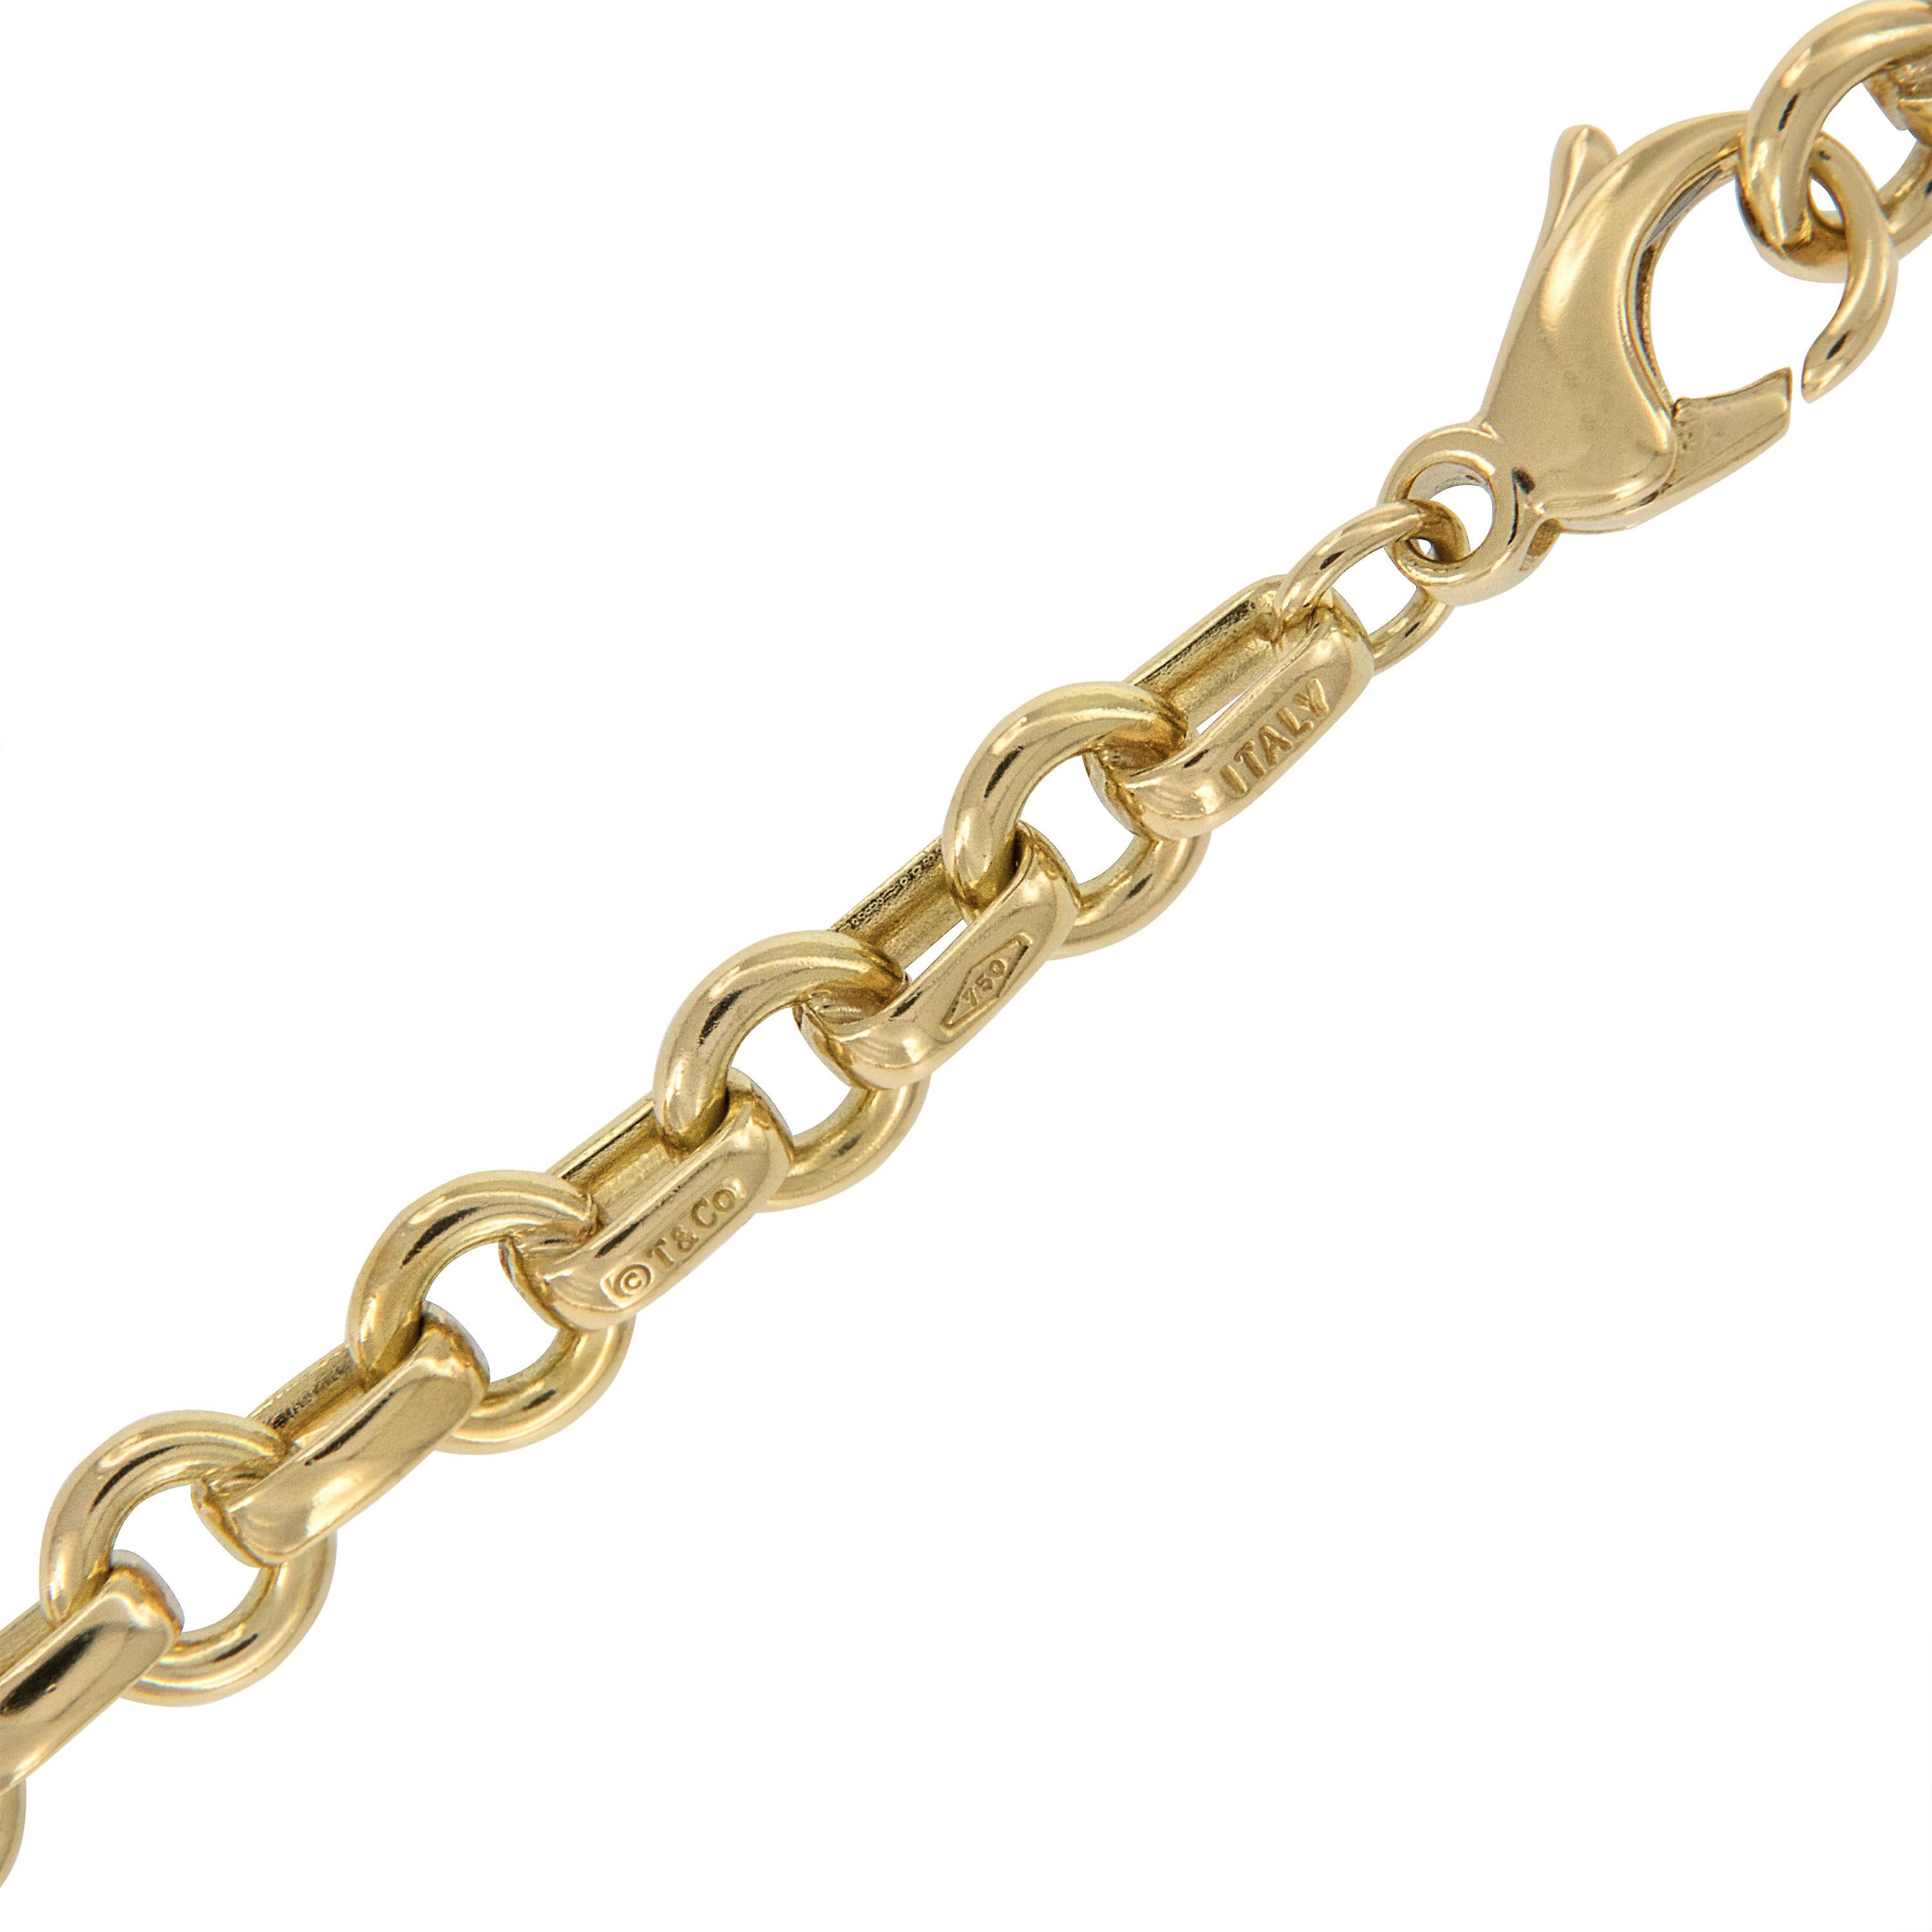 Fantastic genuine Tiffany & Co. round link chain made in Italy 18